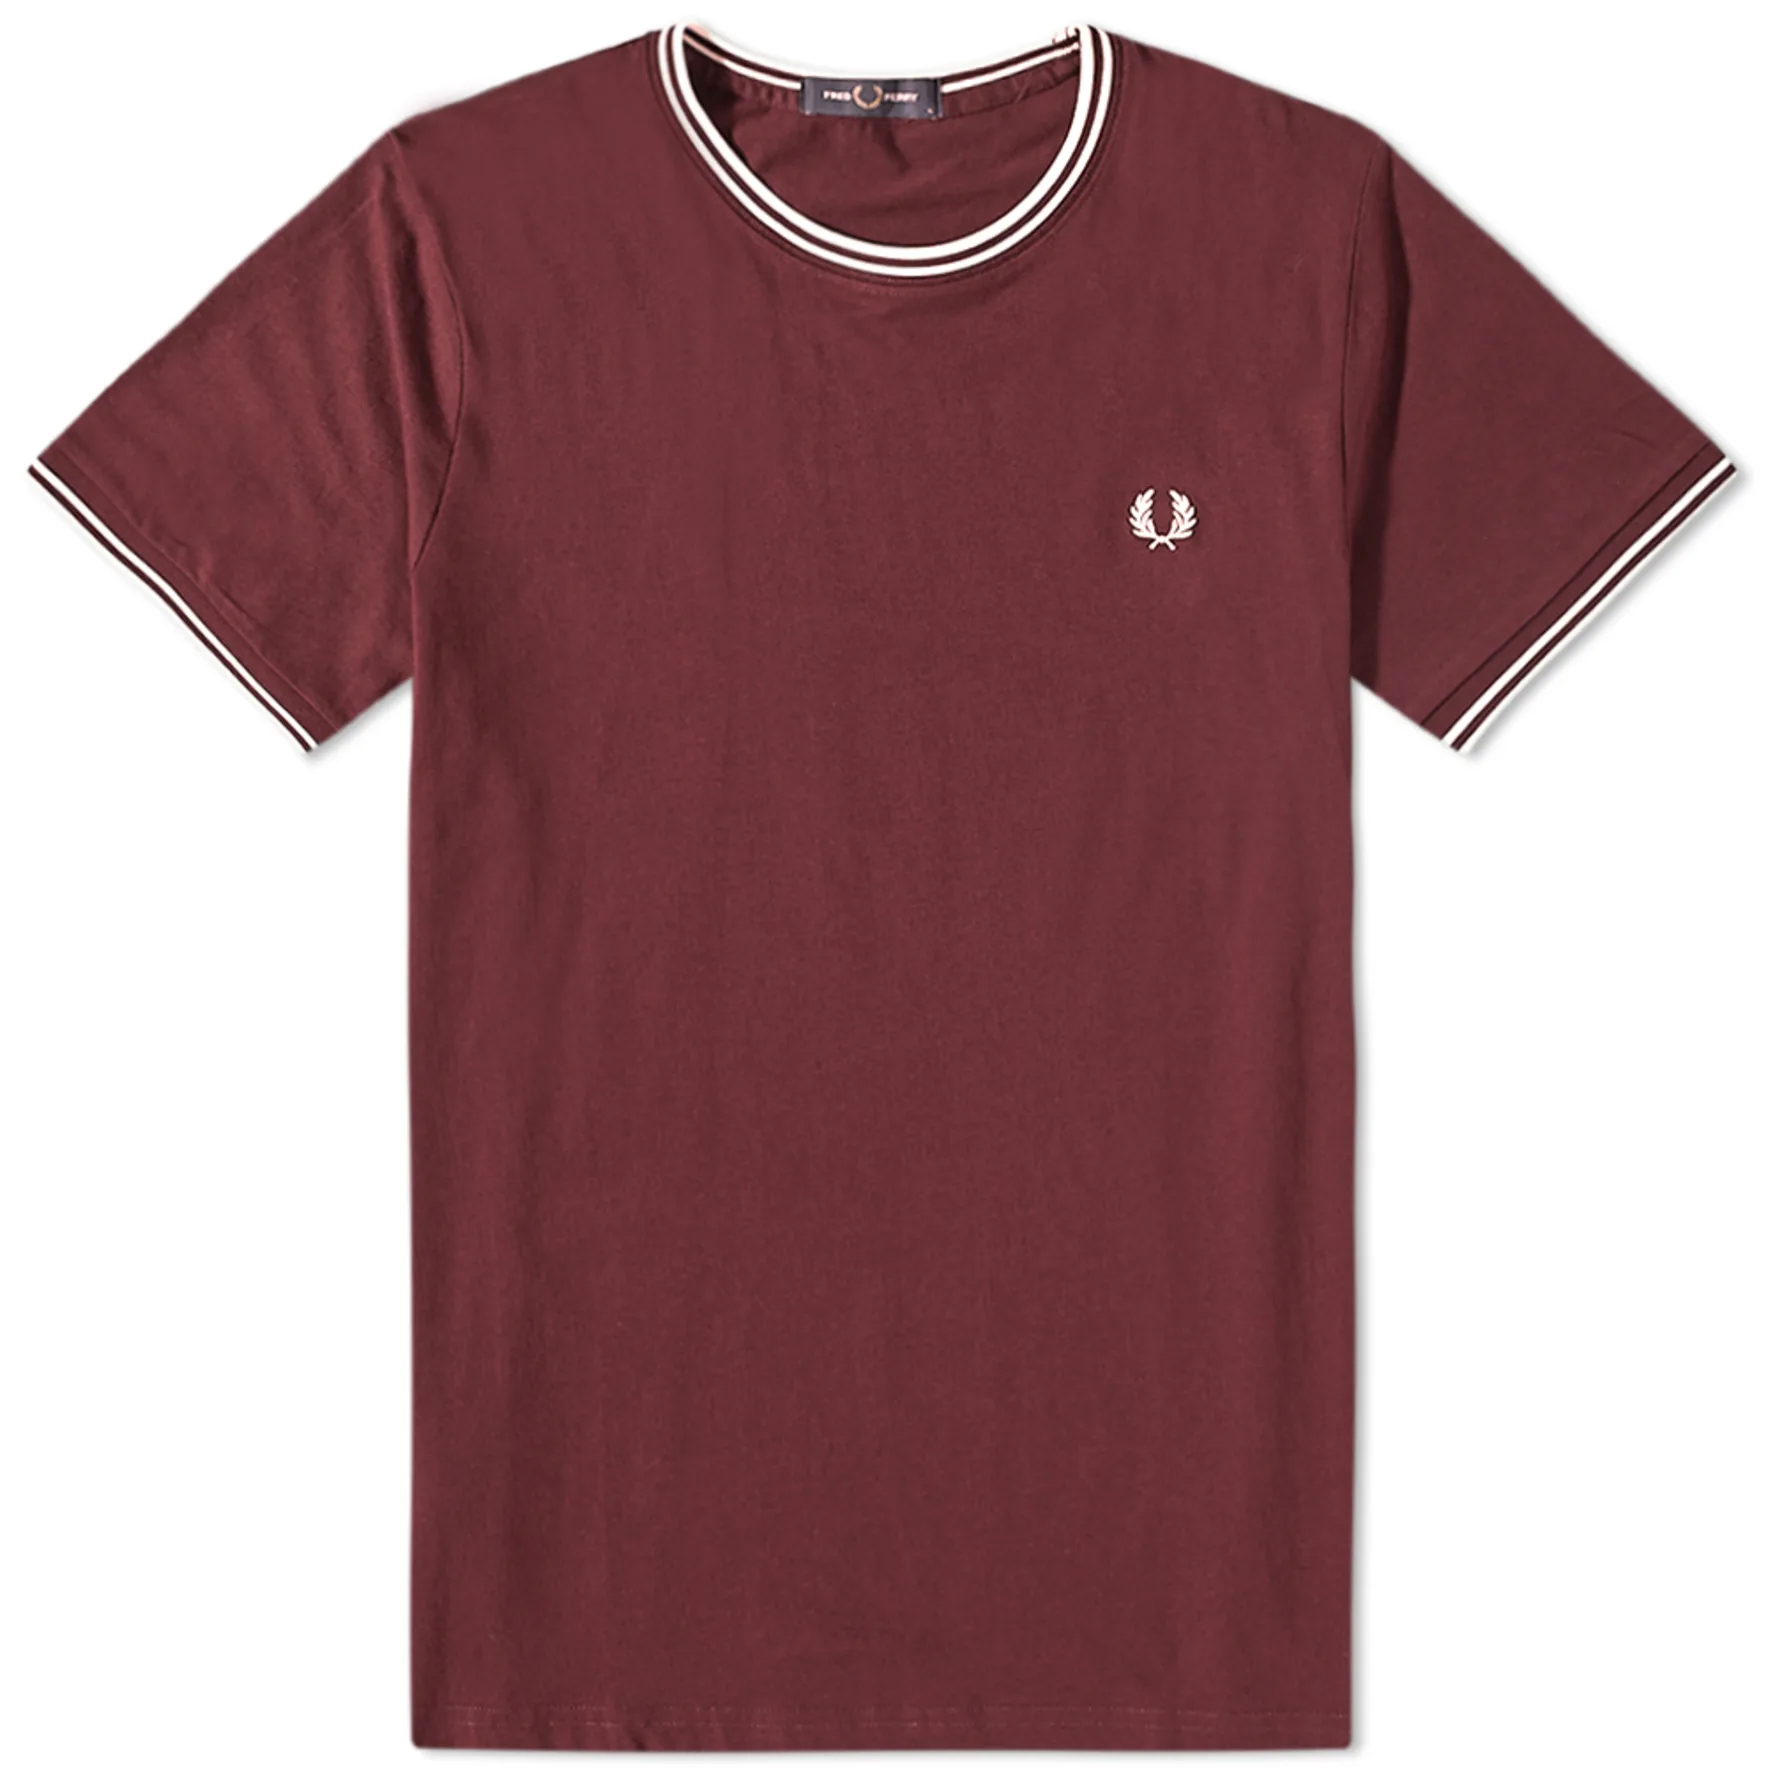 Футболка Fred Perry Authentic Twin Tipped, бордовый поло fred perry twin tipped цвет grey stone